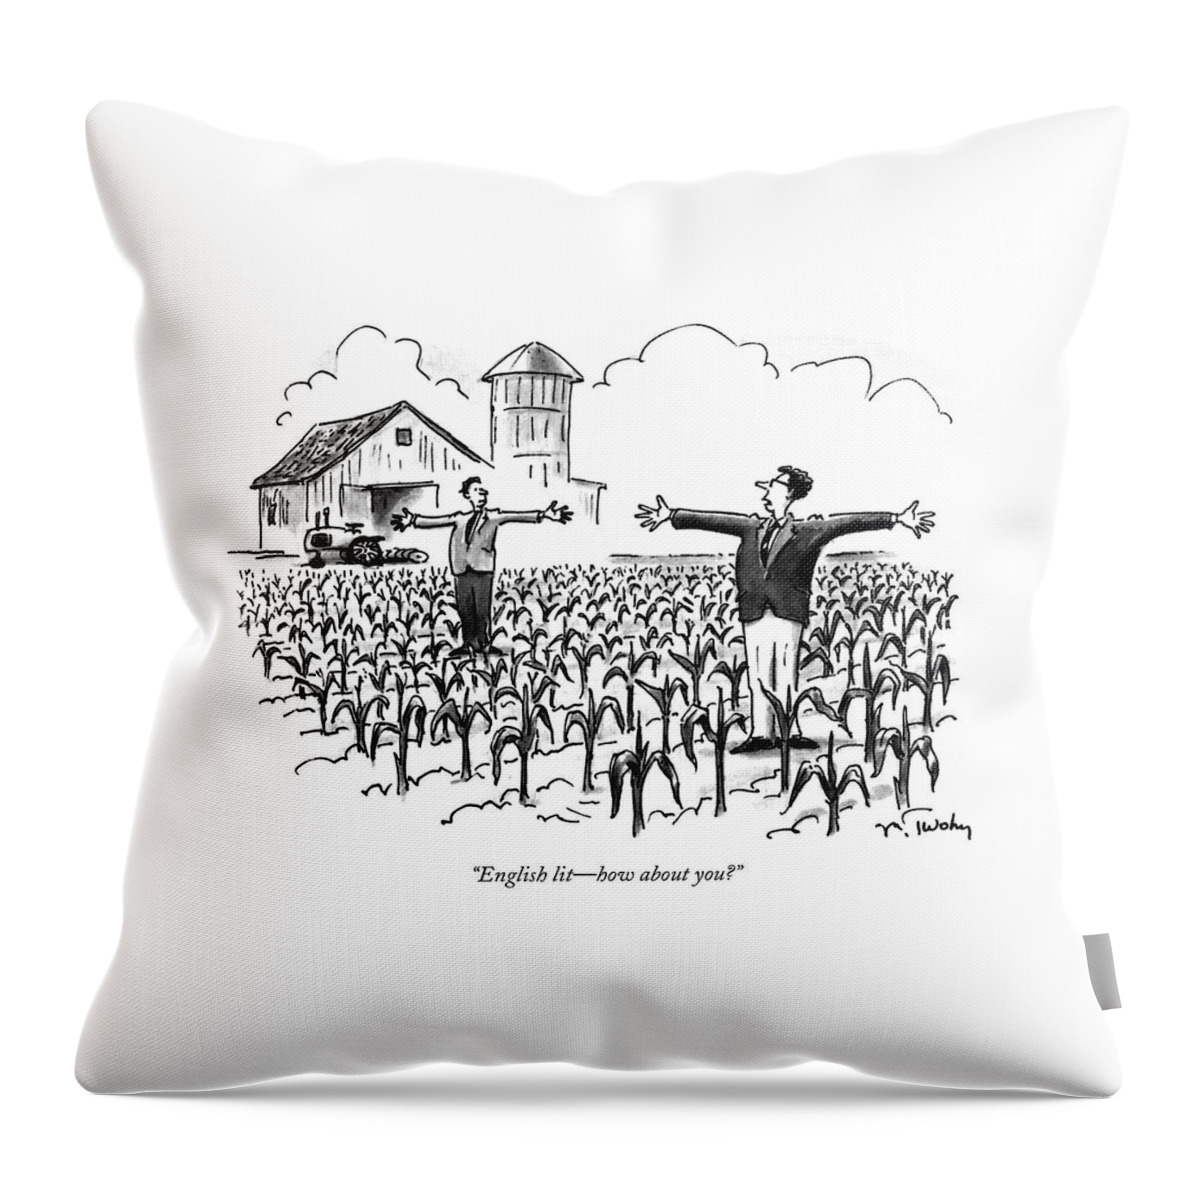 English Lit - How About You? Throw Pillow